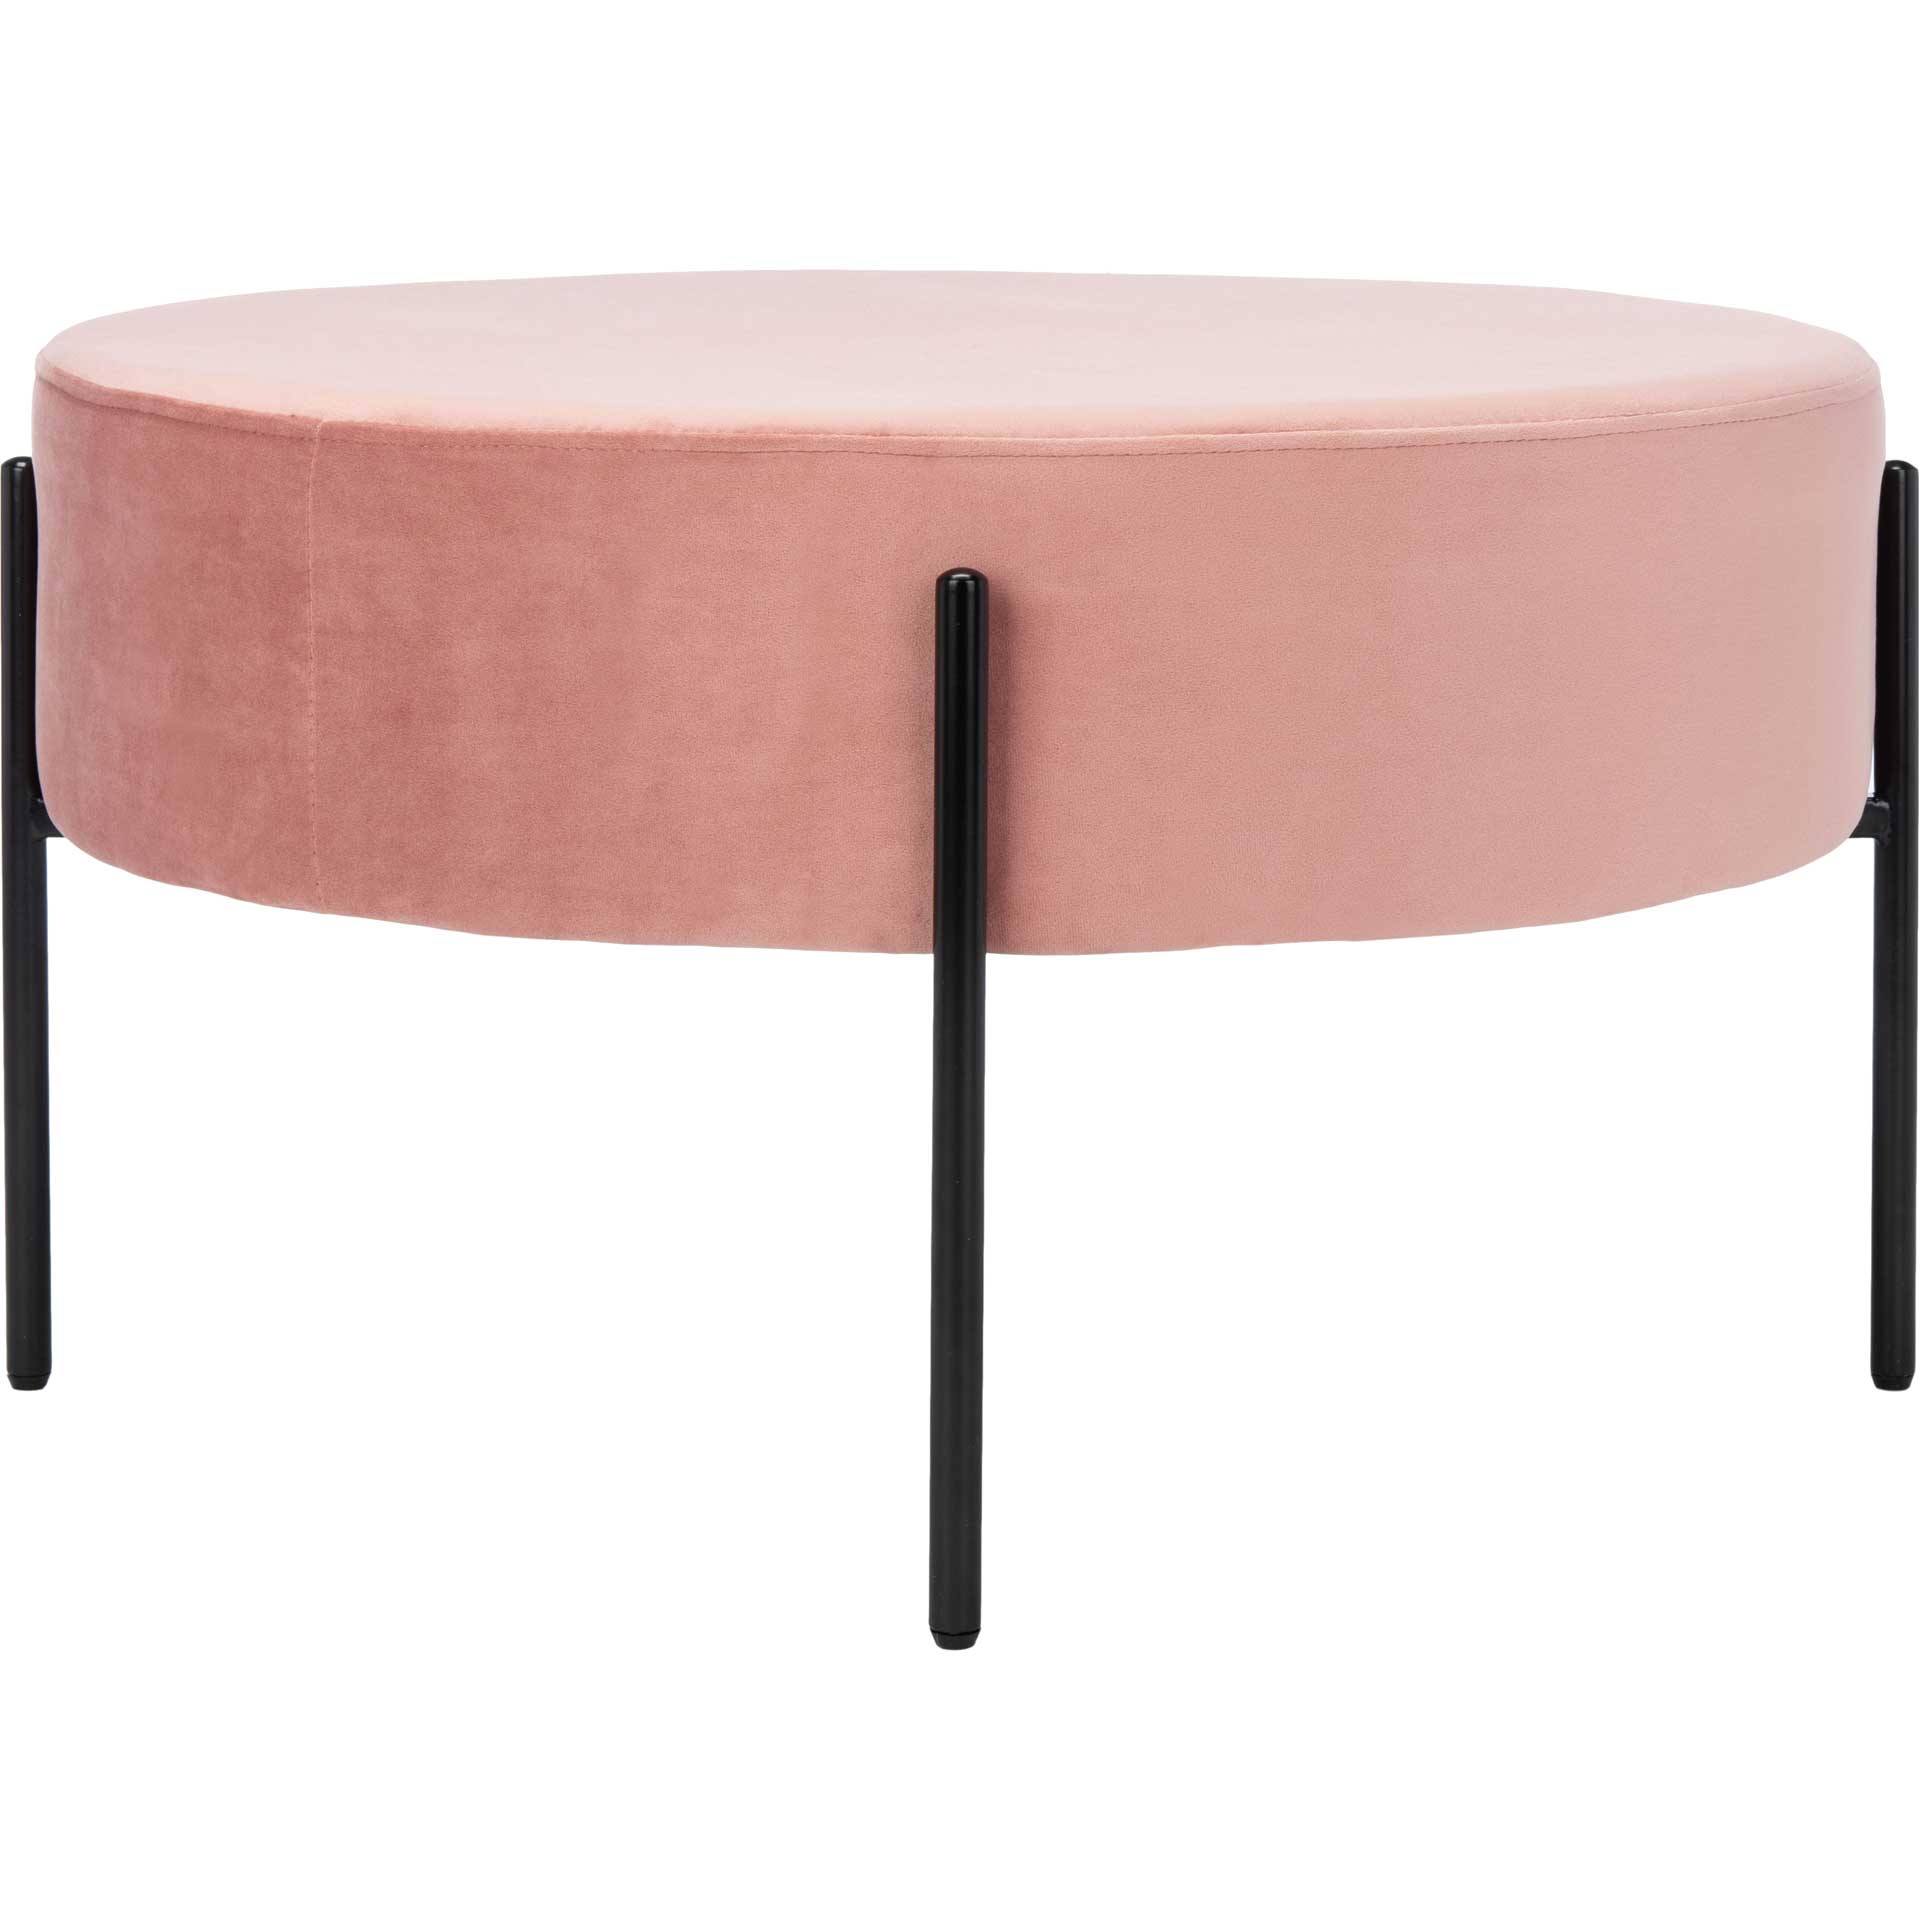 Lincoln Round Cocktail Ottoman Dusty Rose/Black